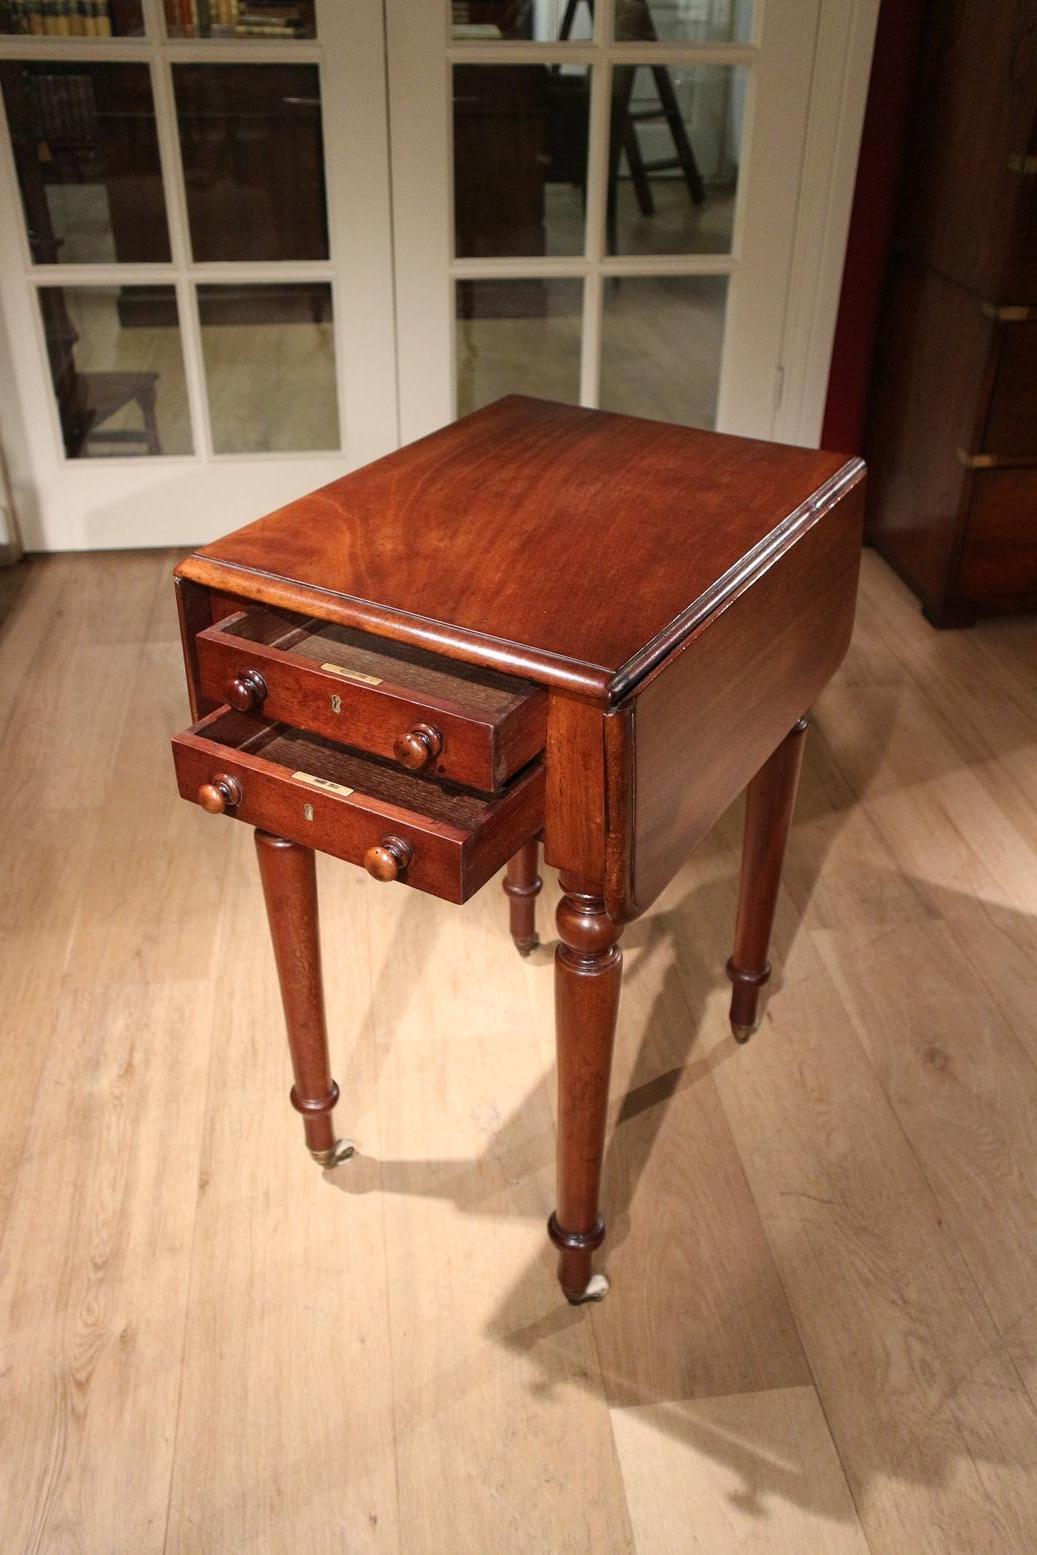 Beautiful little mahogany pembroke table with 2 drawers. Stands on brass wheels. Table is in perfect condition and top quality.
Origin: England
Period: circa 1840
Size: Br. 20-36-20, D  50cm, H 72cm.